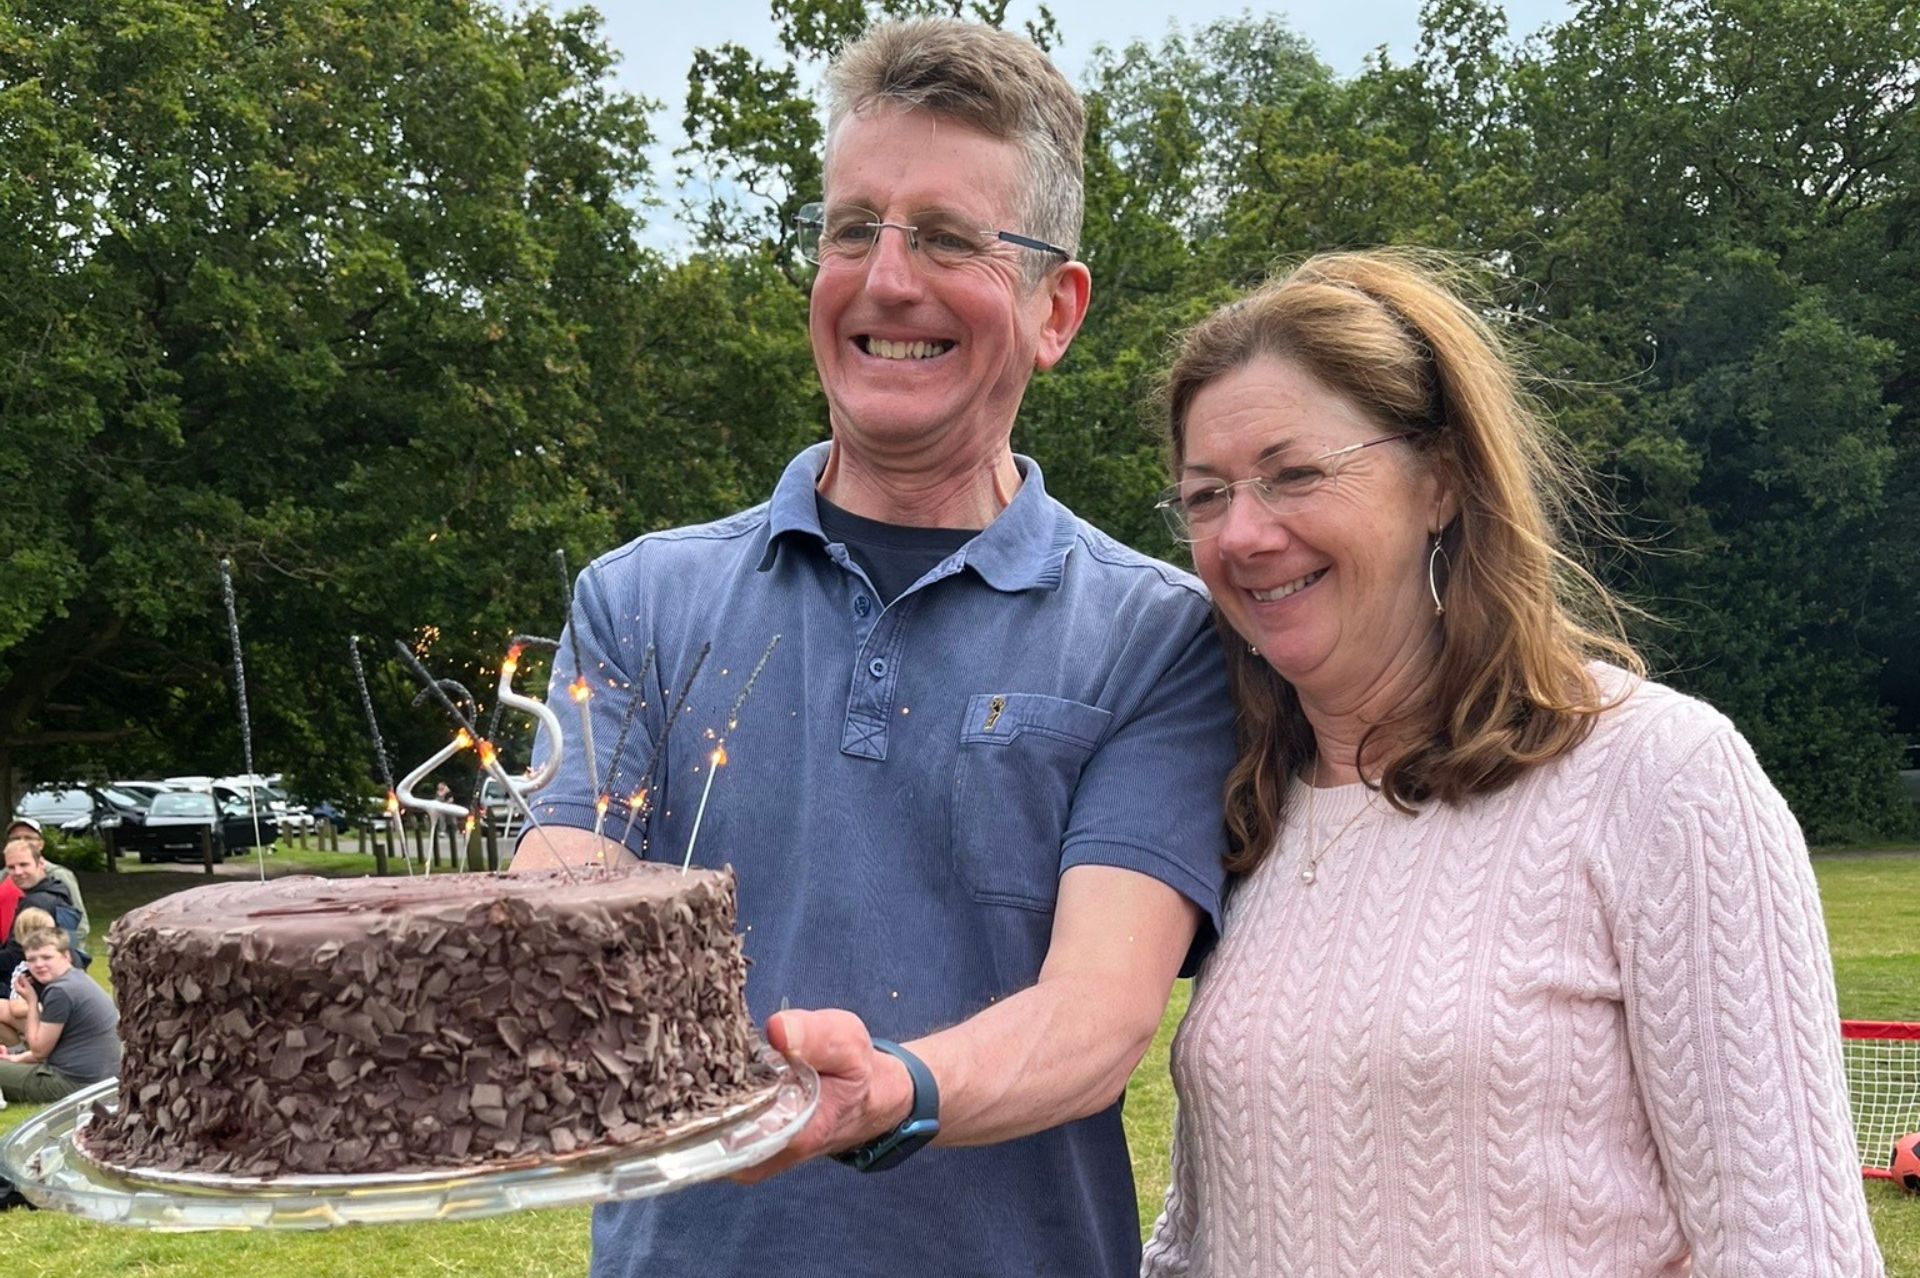 George and Jane Newton holding a homemade cake with a 25 sparkler on